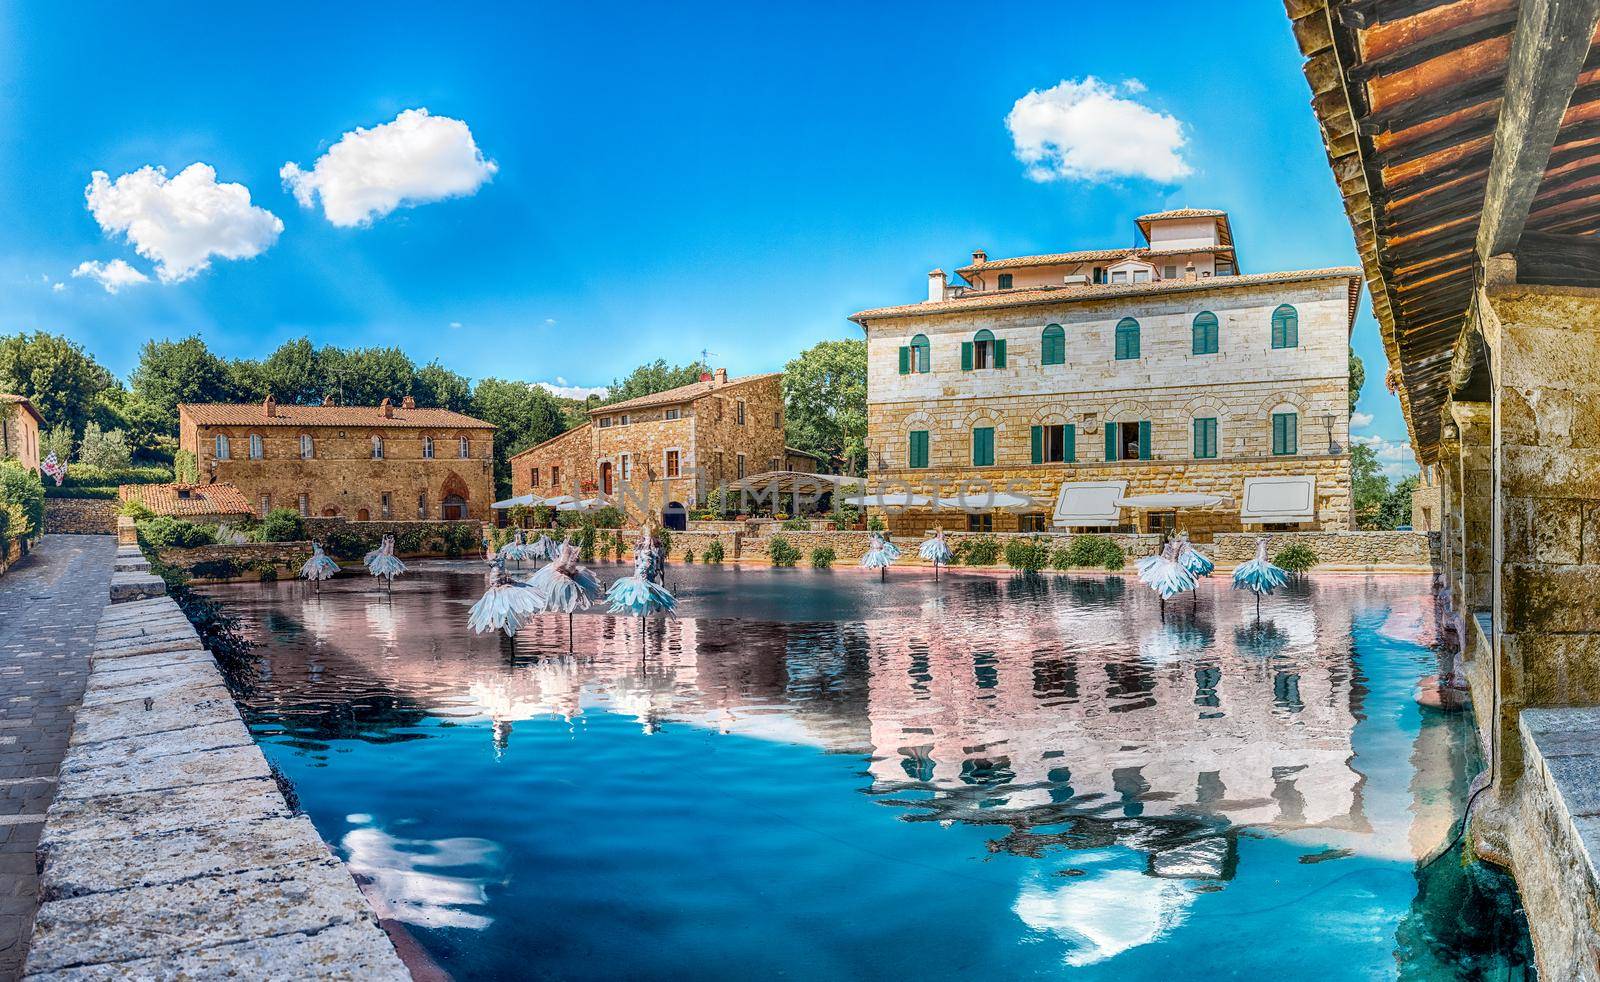 The iconic medieval thermal baths, major landmark and sightseeing in the town of Bagno Vignoni, province of Siena, Tuscany, Italy